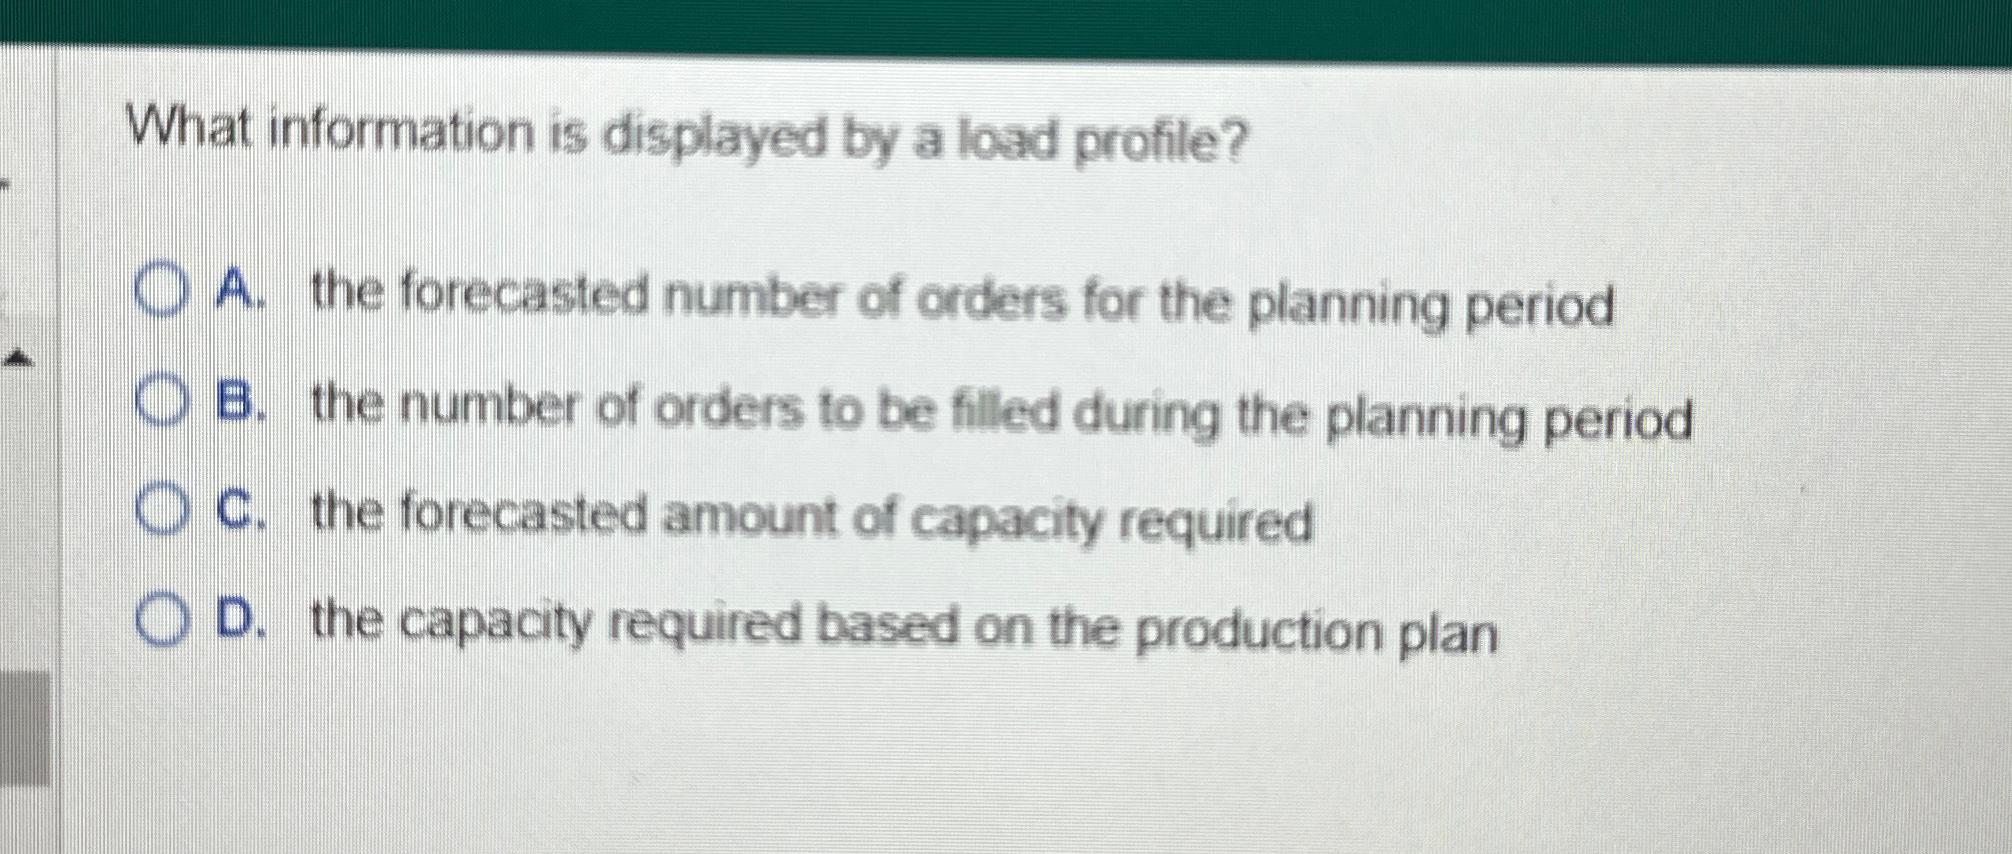 What information is displayed by a load profile? A. the forecasted number of orders for the planning period